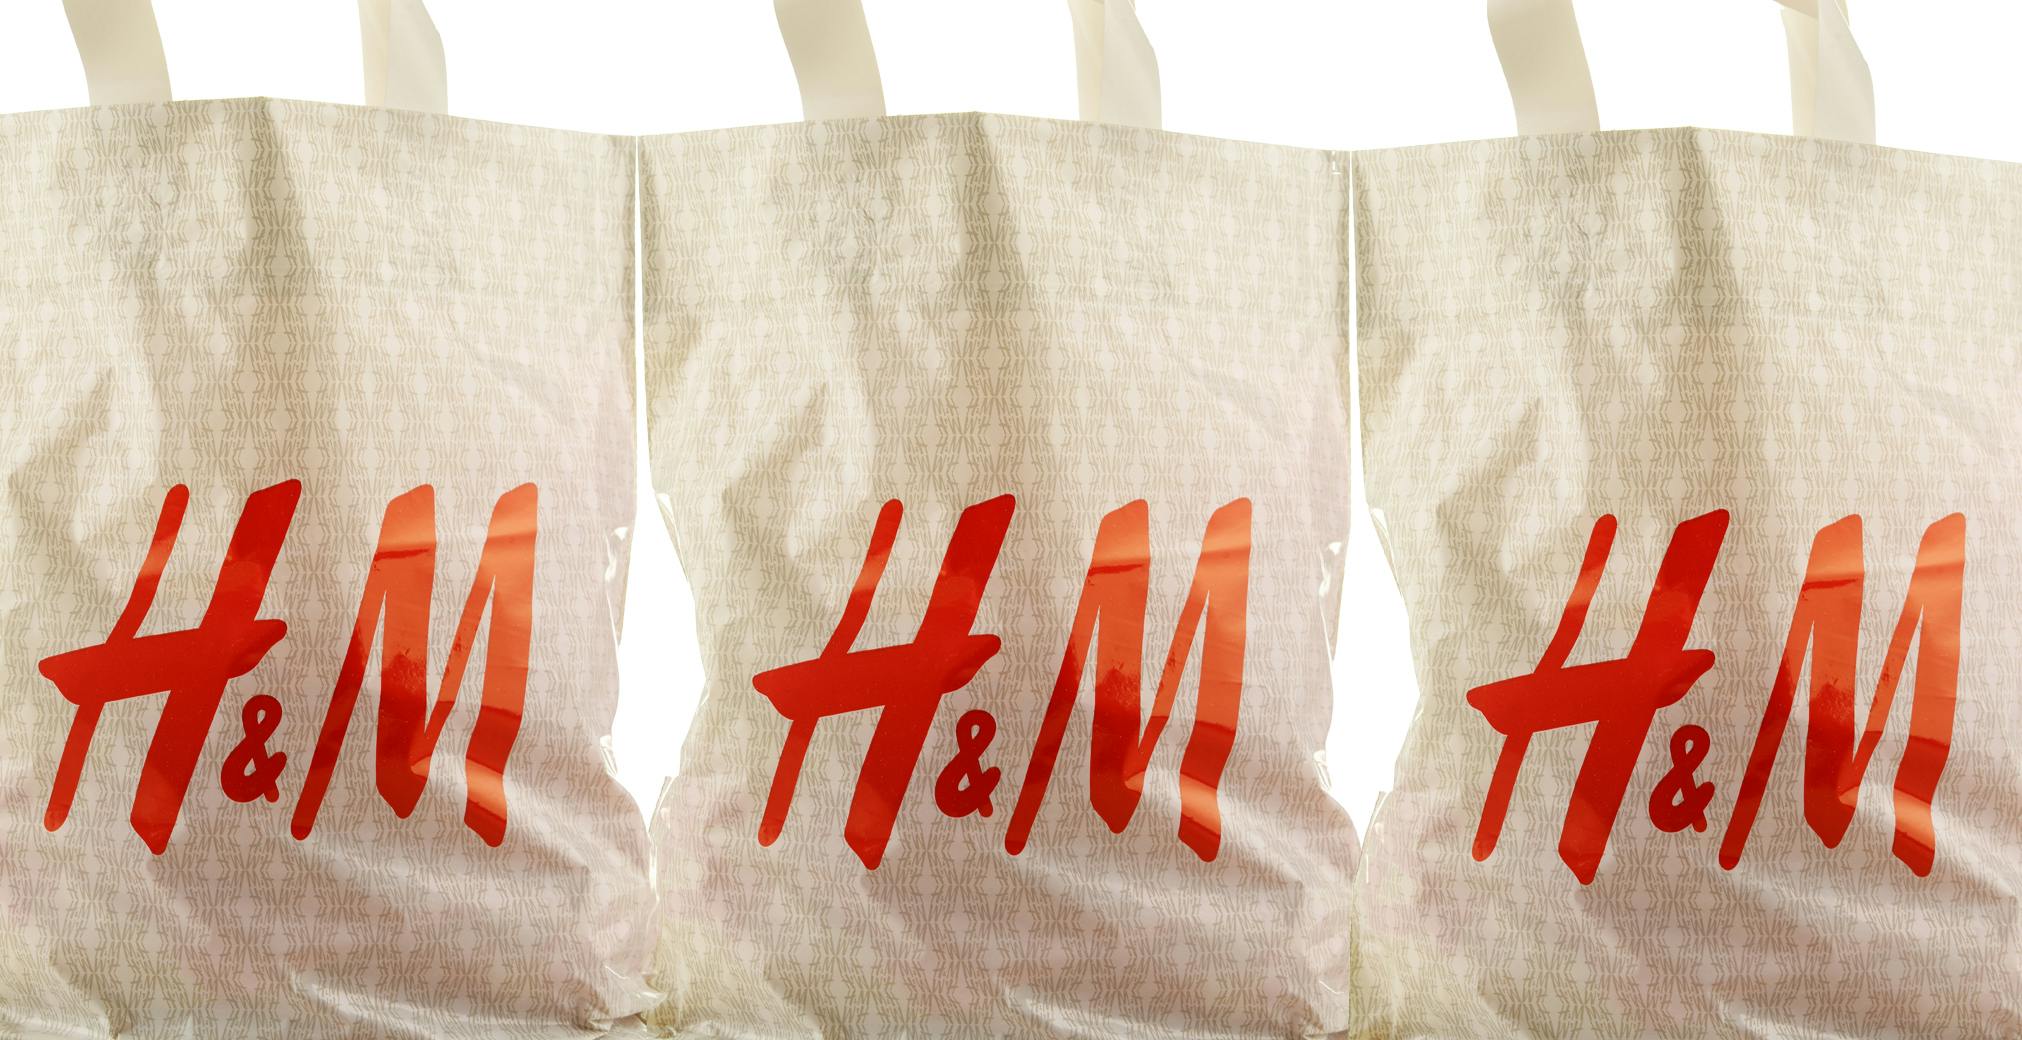 H&M Student Discount: What to Know Before You Shop